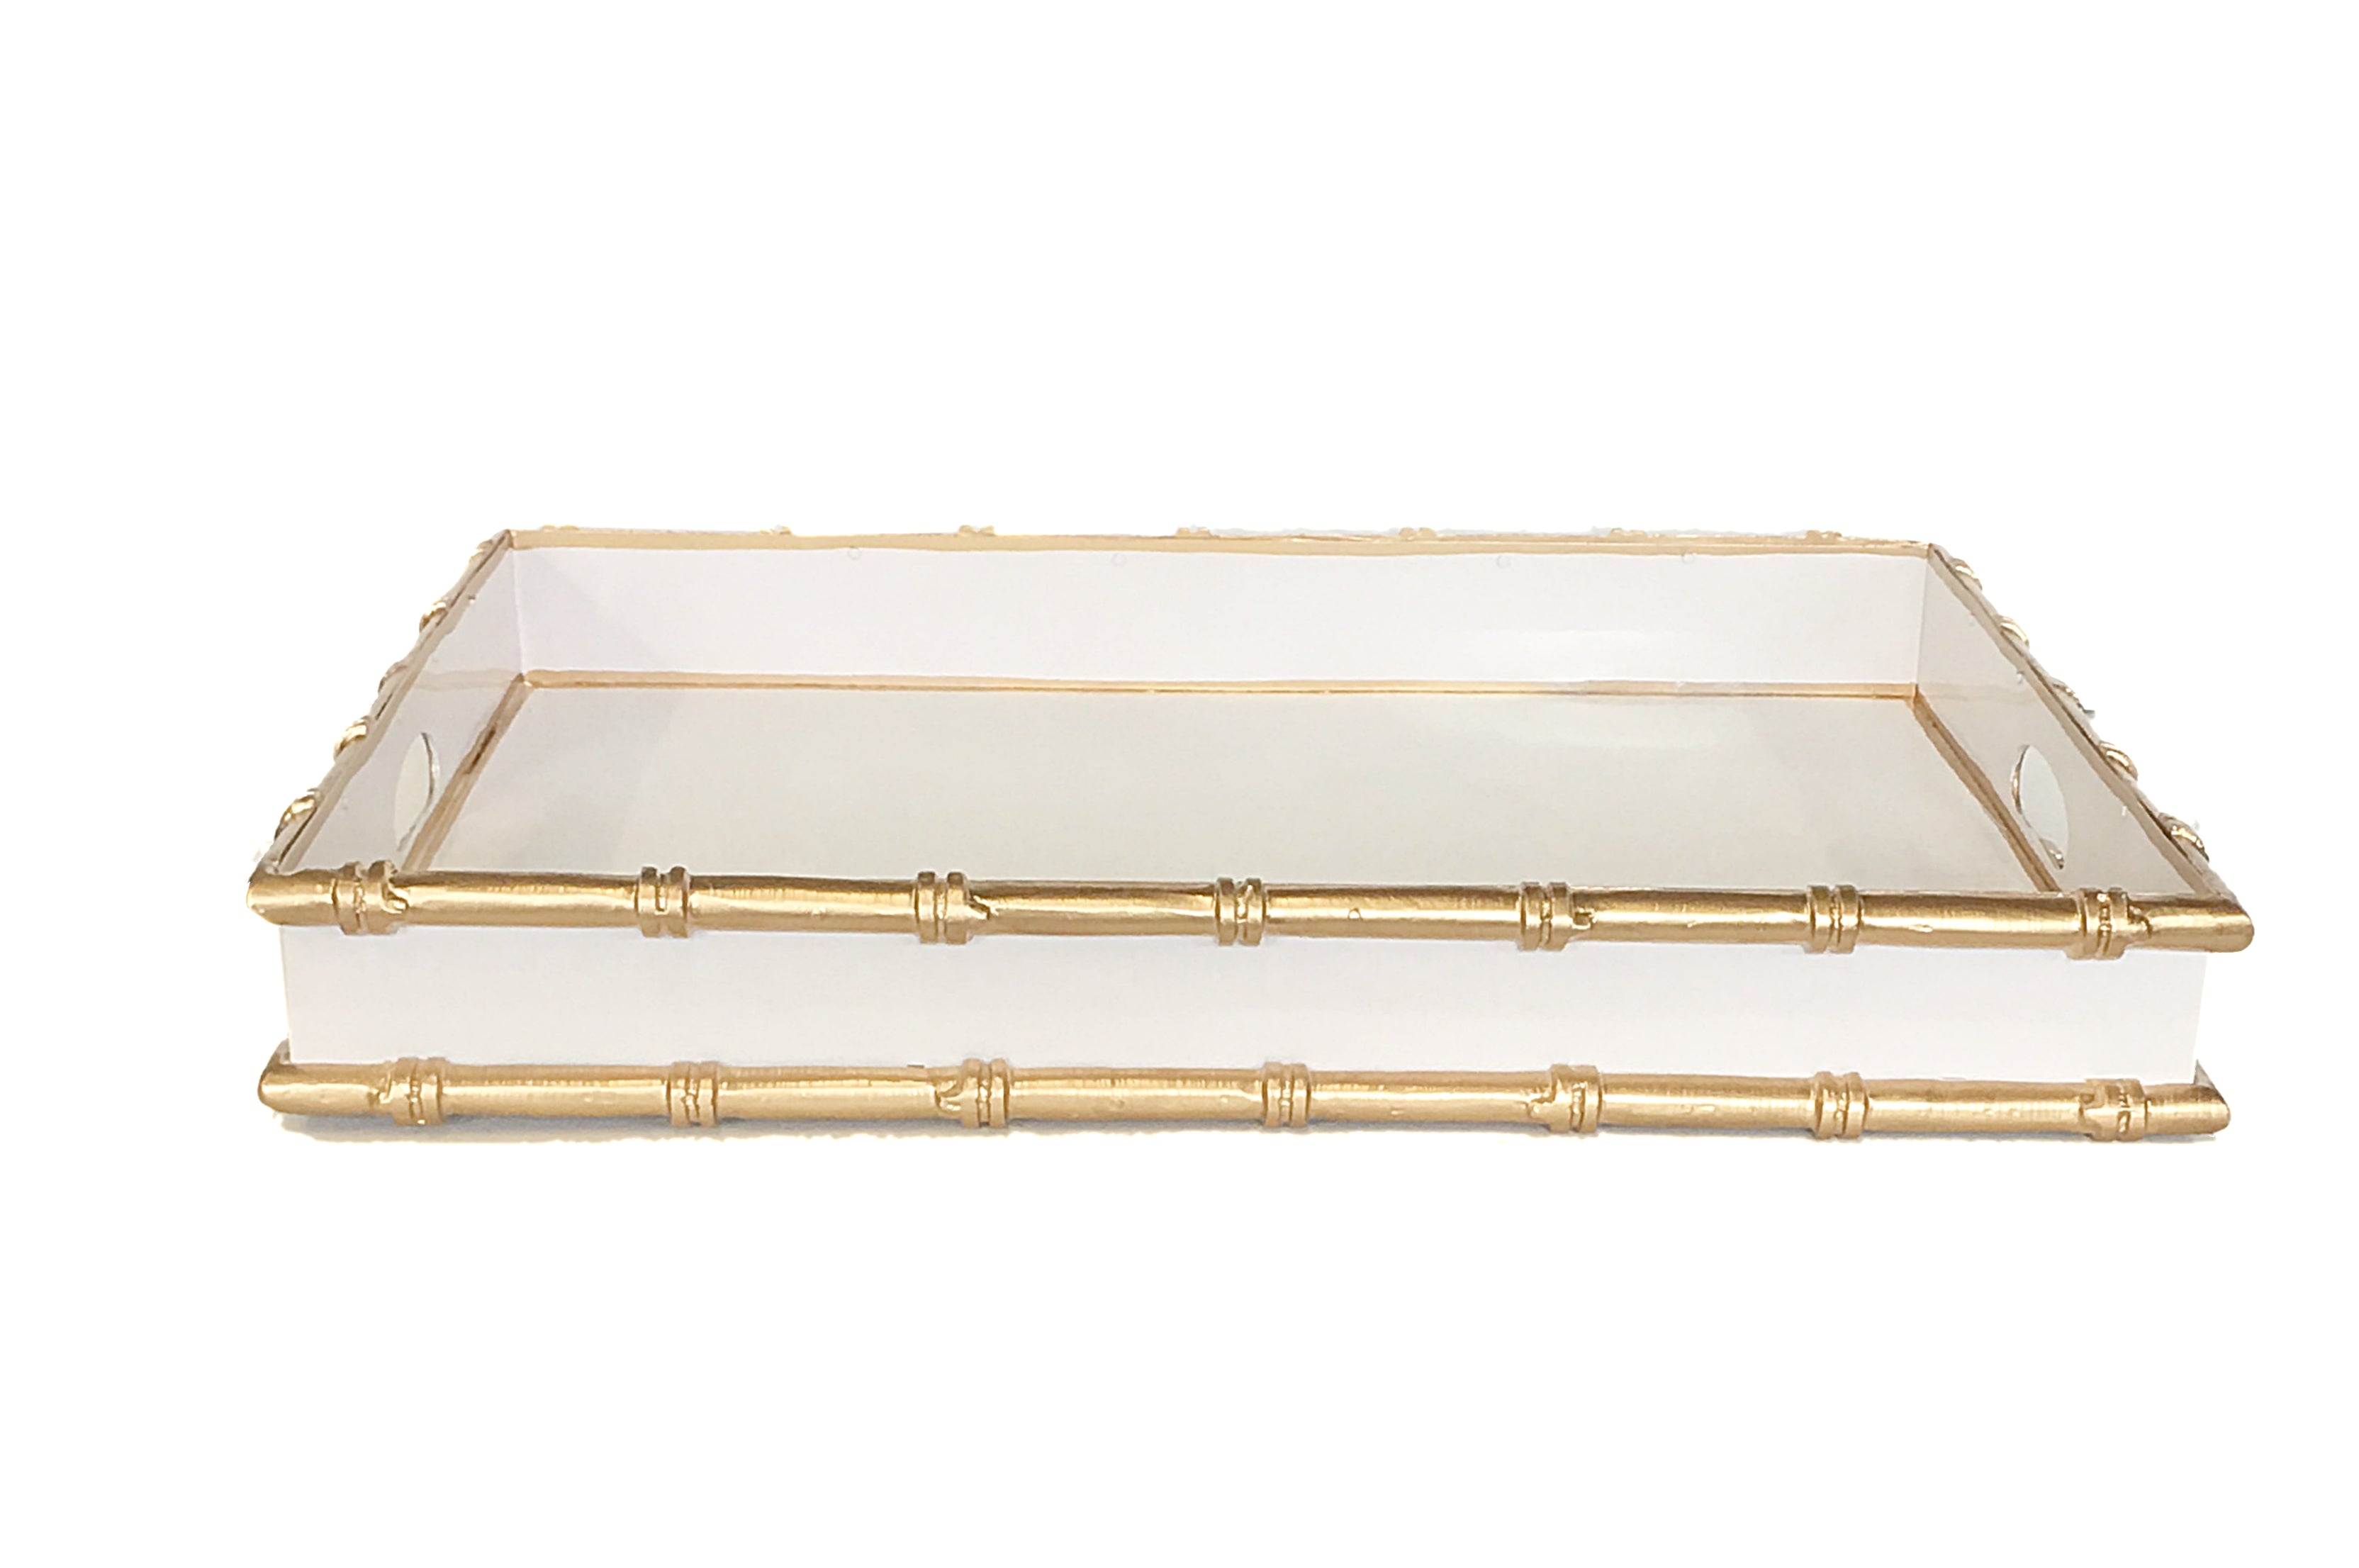 Dana Gibson Bamboo in White Serving Tray